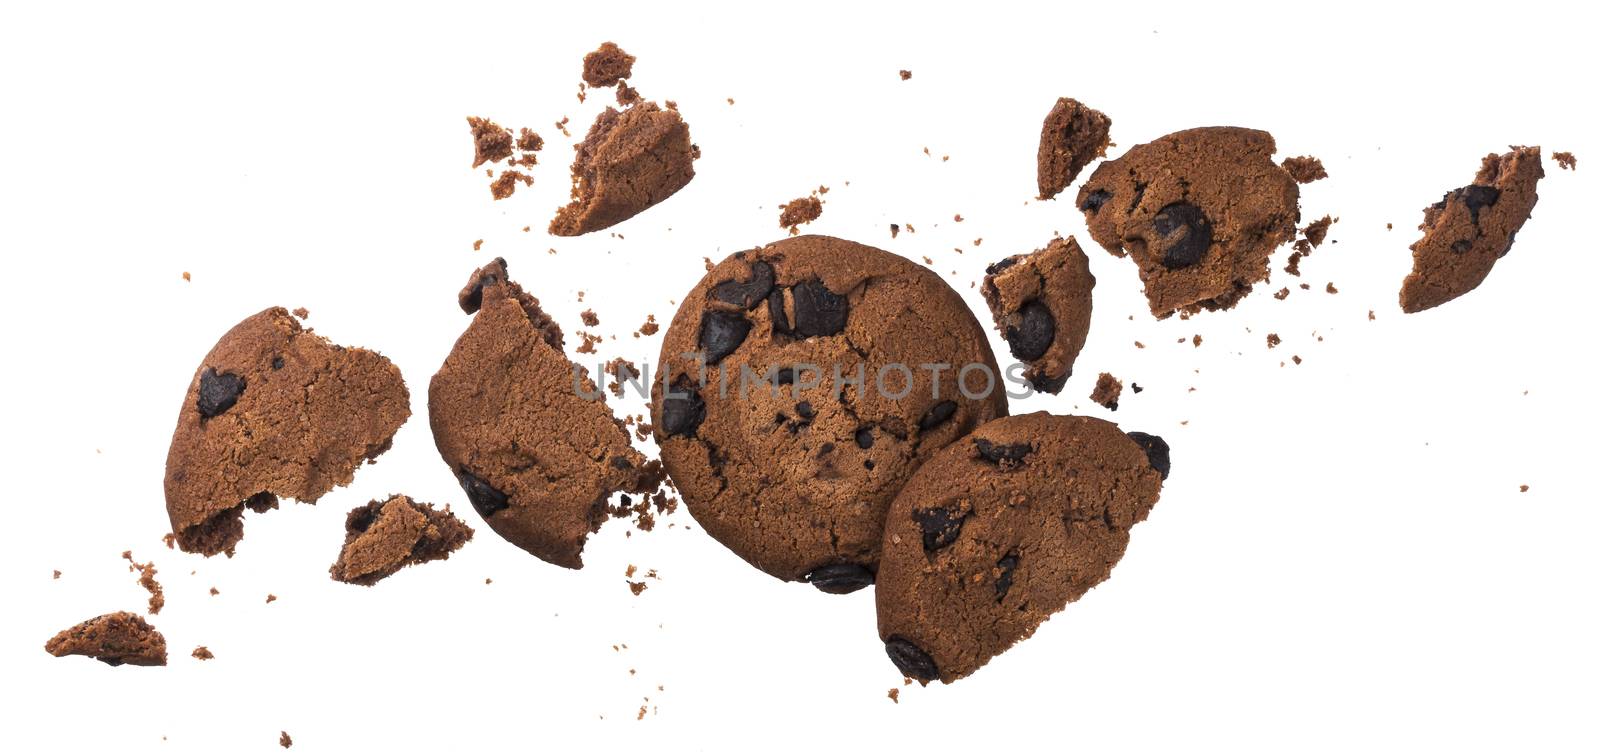 Broken chocolate chip cookies isolated on white background with clipping path. Collection